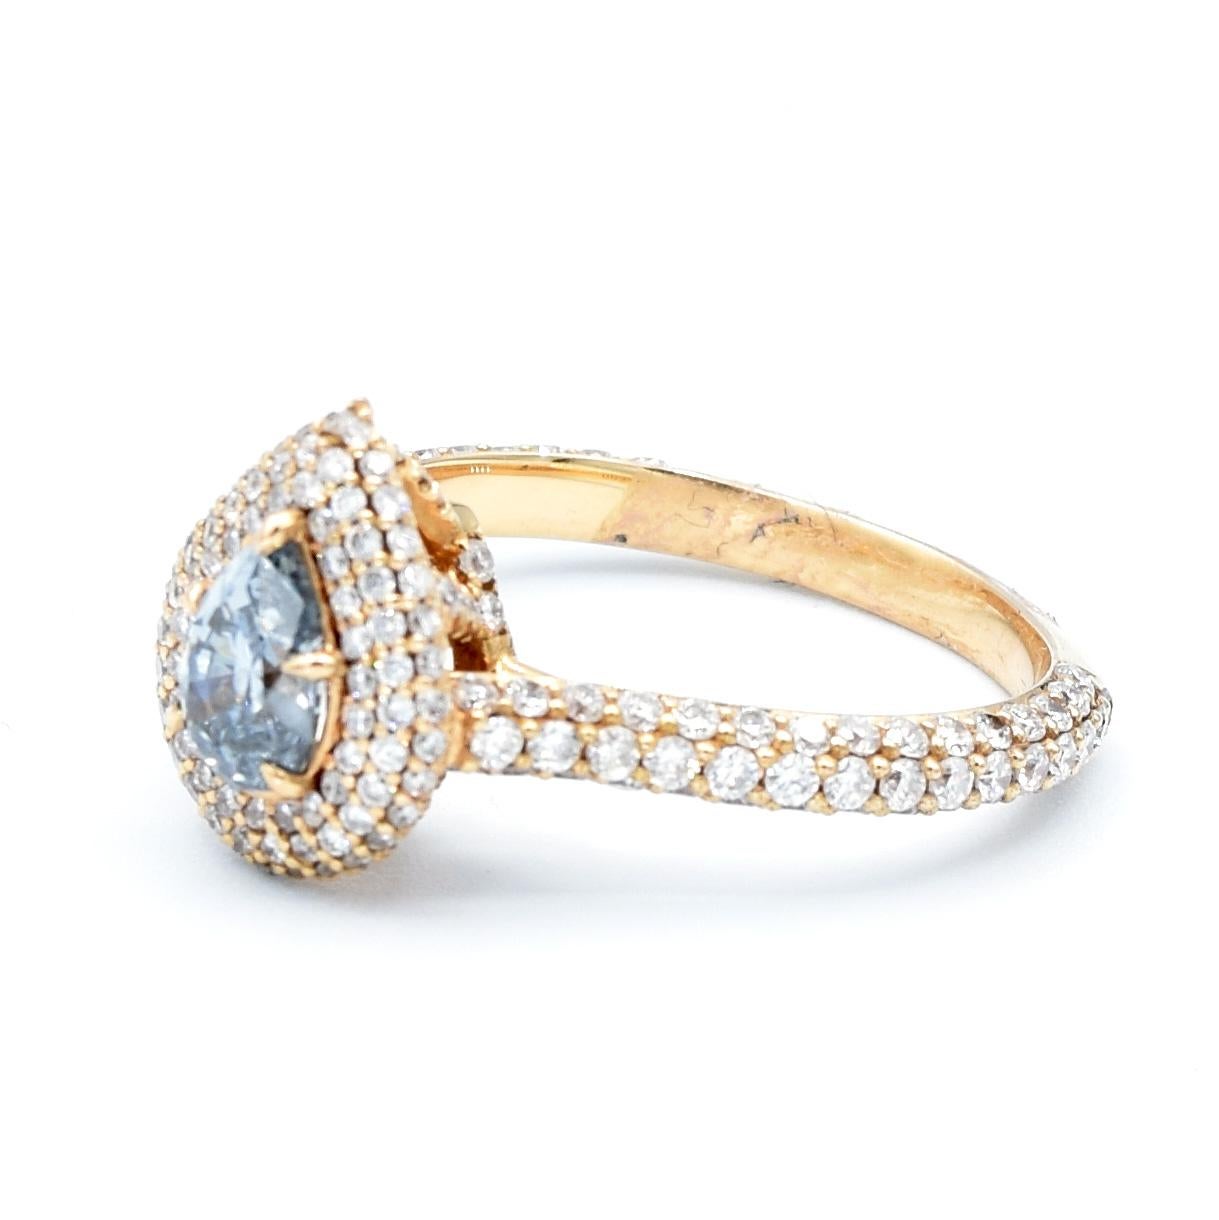 This remarkable natural 0.58 Carat Pear shape Fancy grayish blue is certified from GIA (report #1162731992).

Set in 18 karat rose gold and surrounded in pavé diamonds.

Ring Size 6 (resizeable)
3.70 grams 

Every Upper-Luxury piece will arrive in